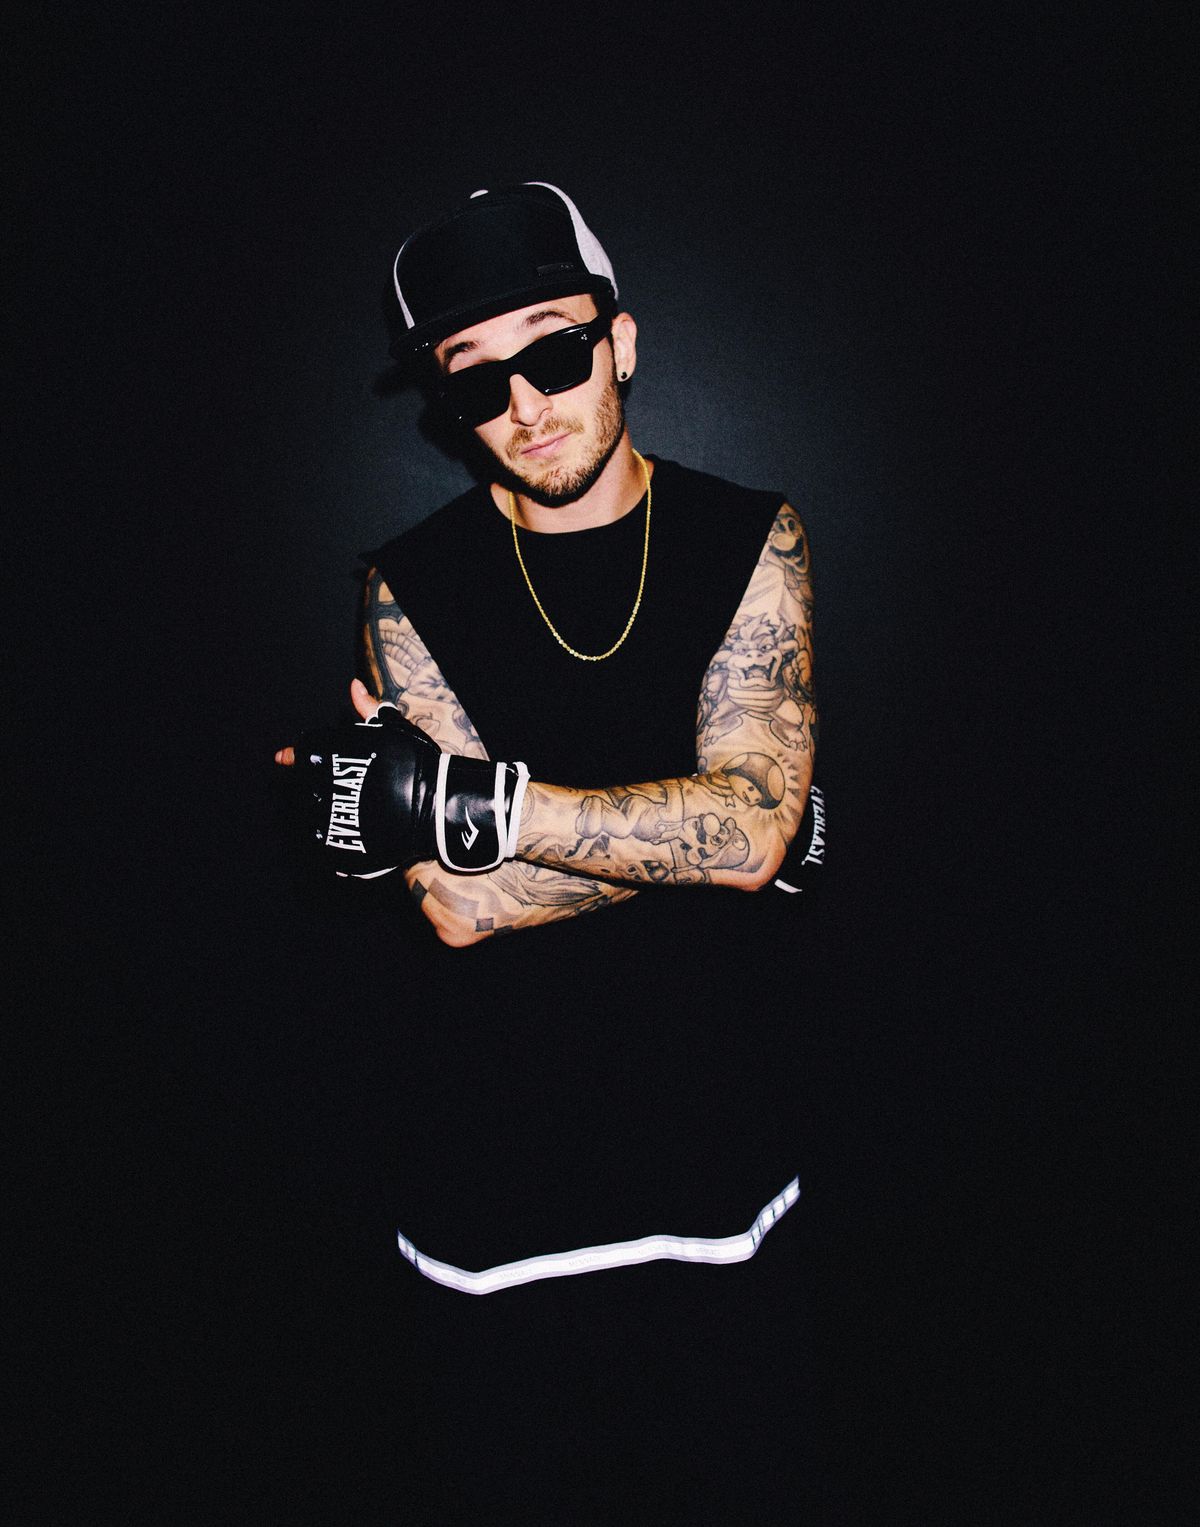 CHRIS WEBBY with special guests